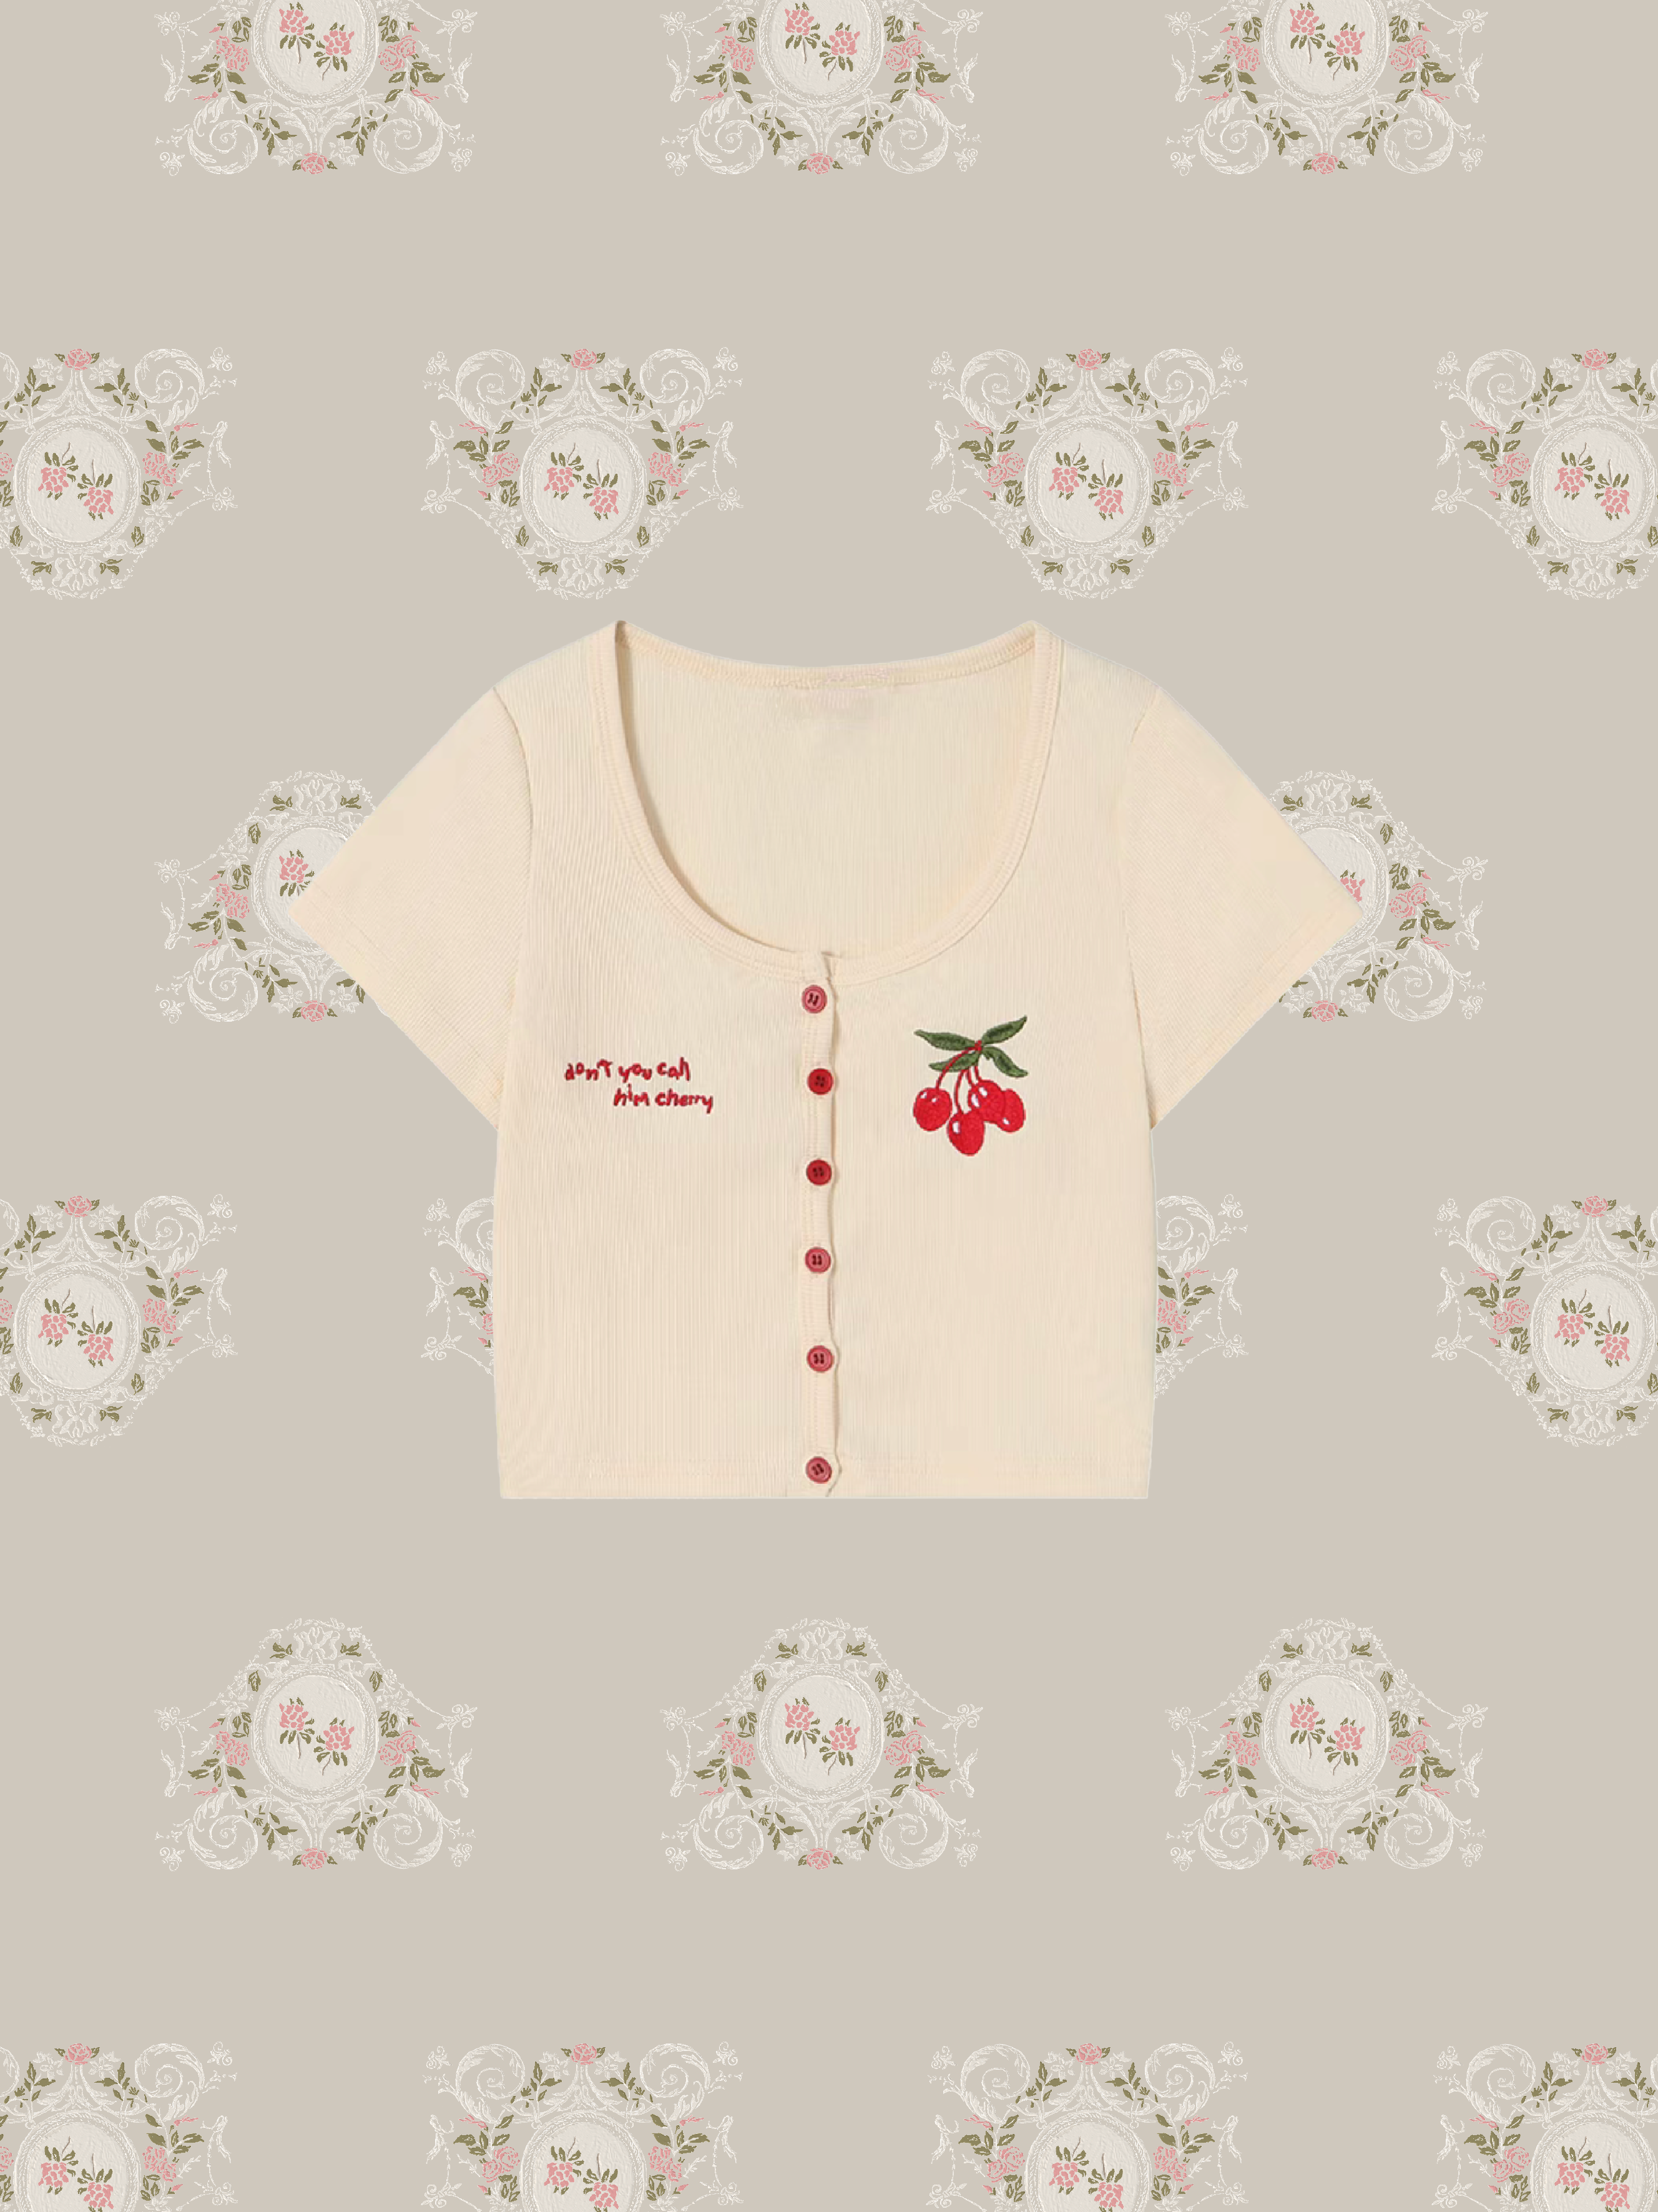 Cherry Embroidered Top/チェリー刺繍トップス